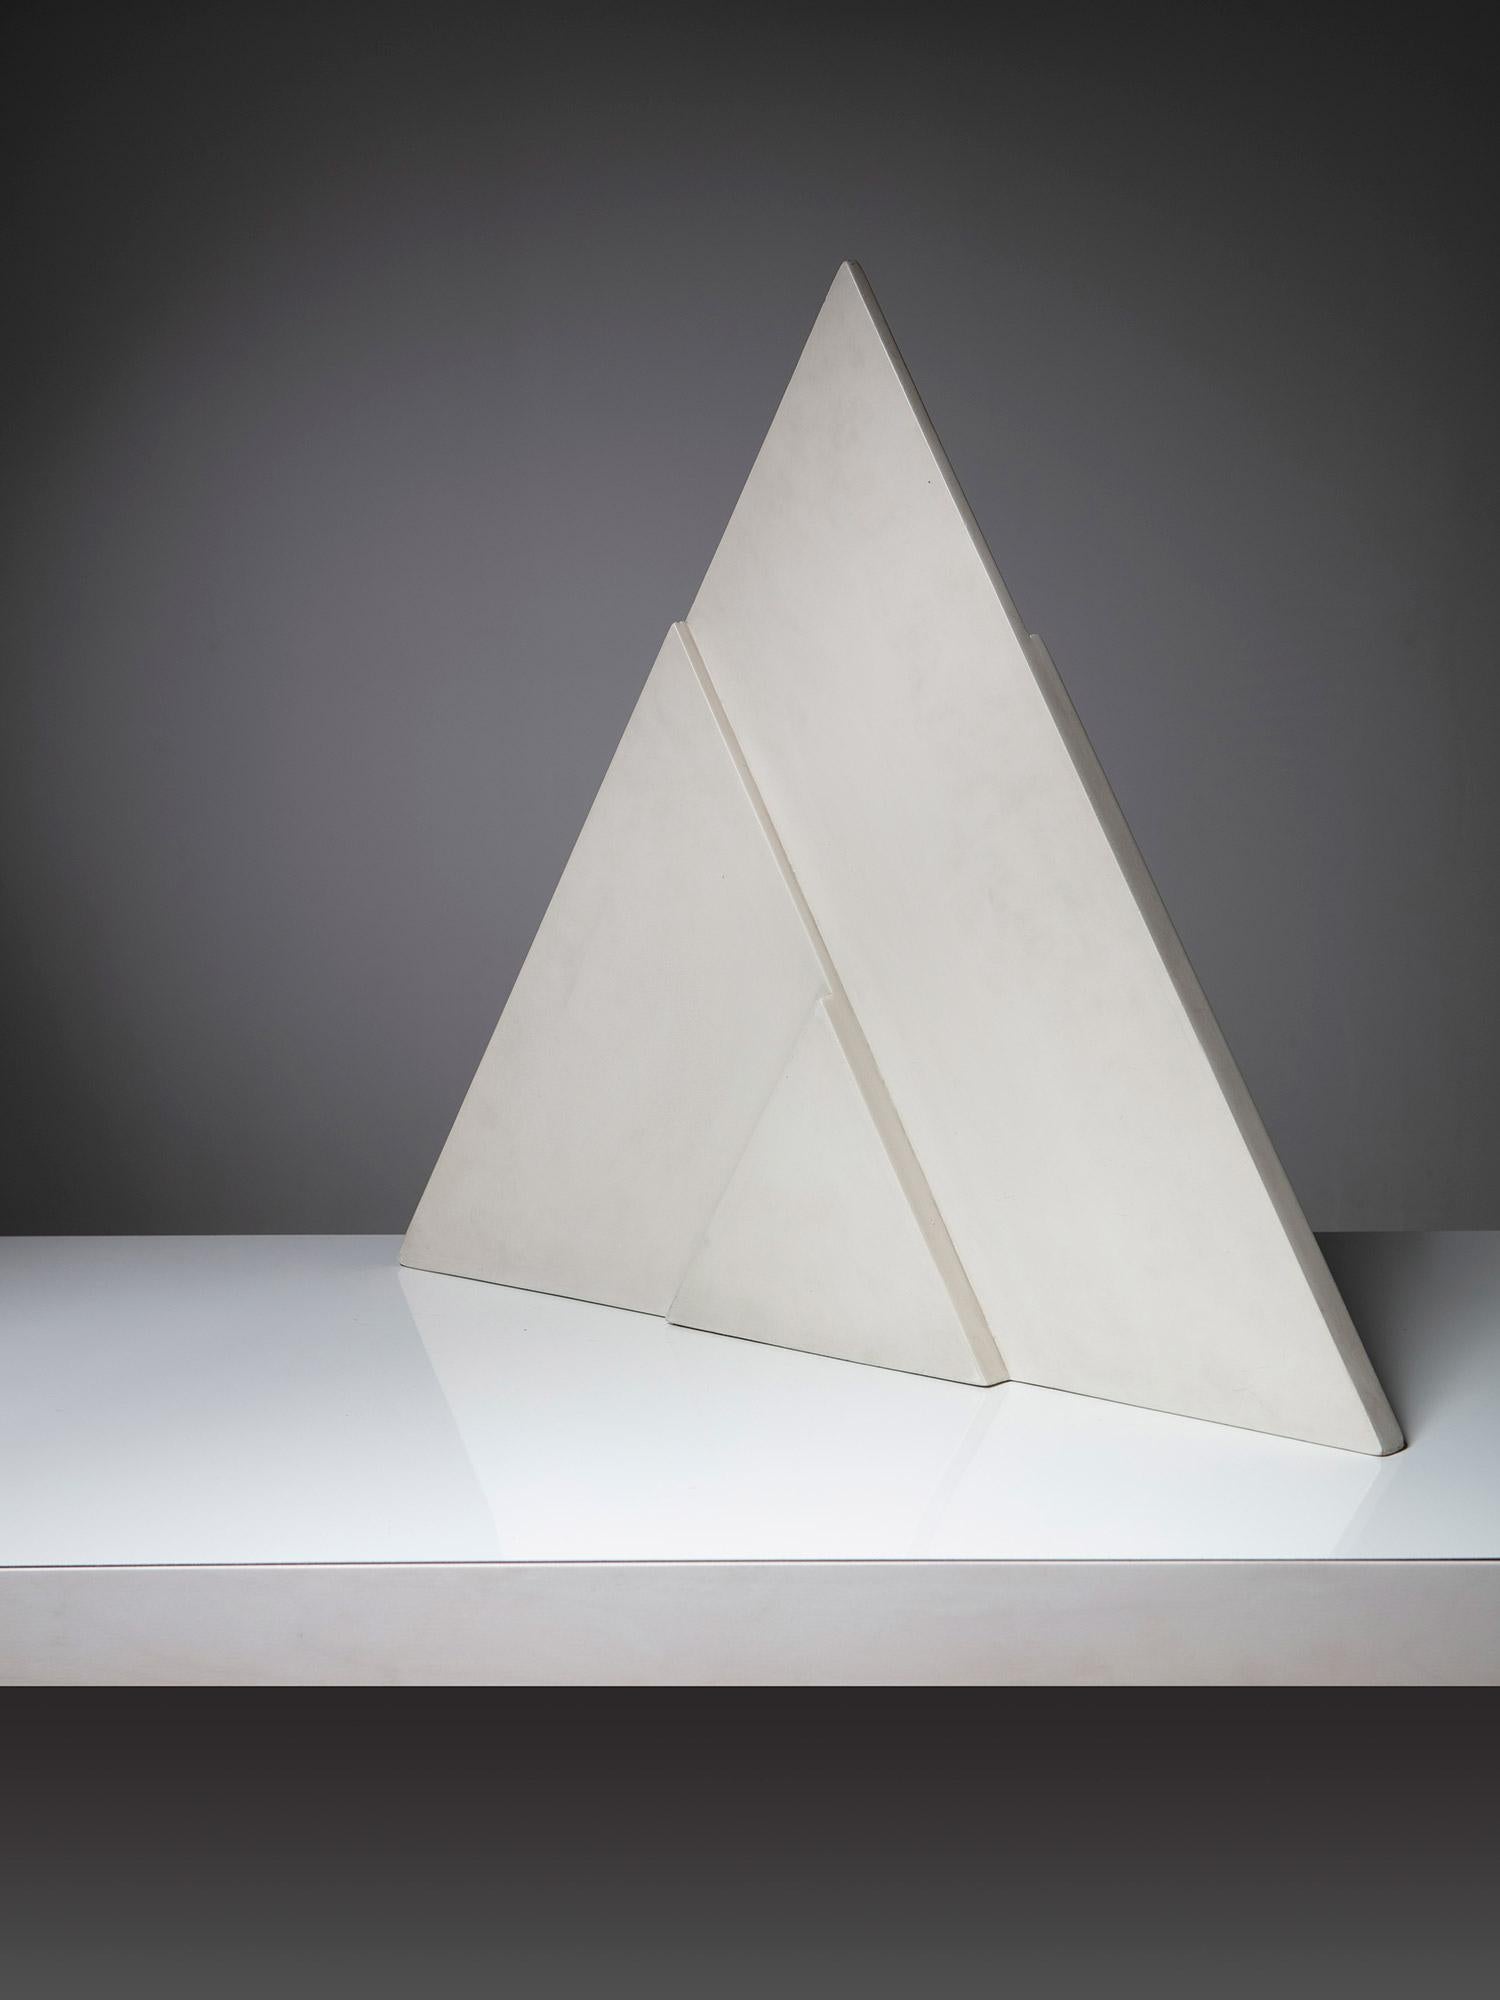 Italian Triangular Lacquered Wood Sculpture by The Vallé, Italy, 1969 For Sale